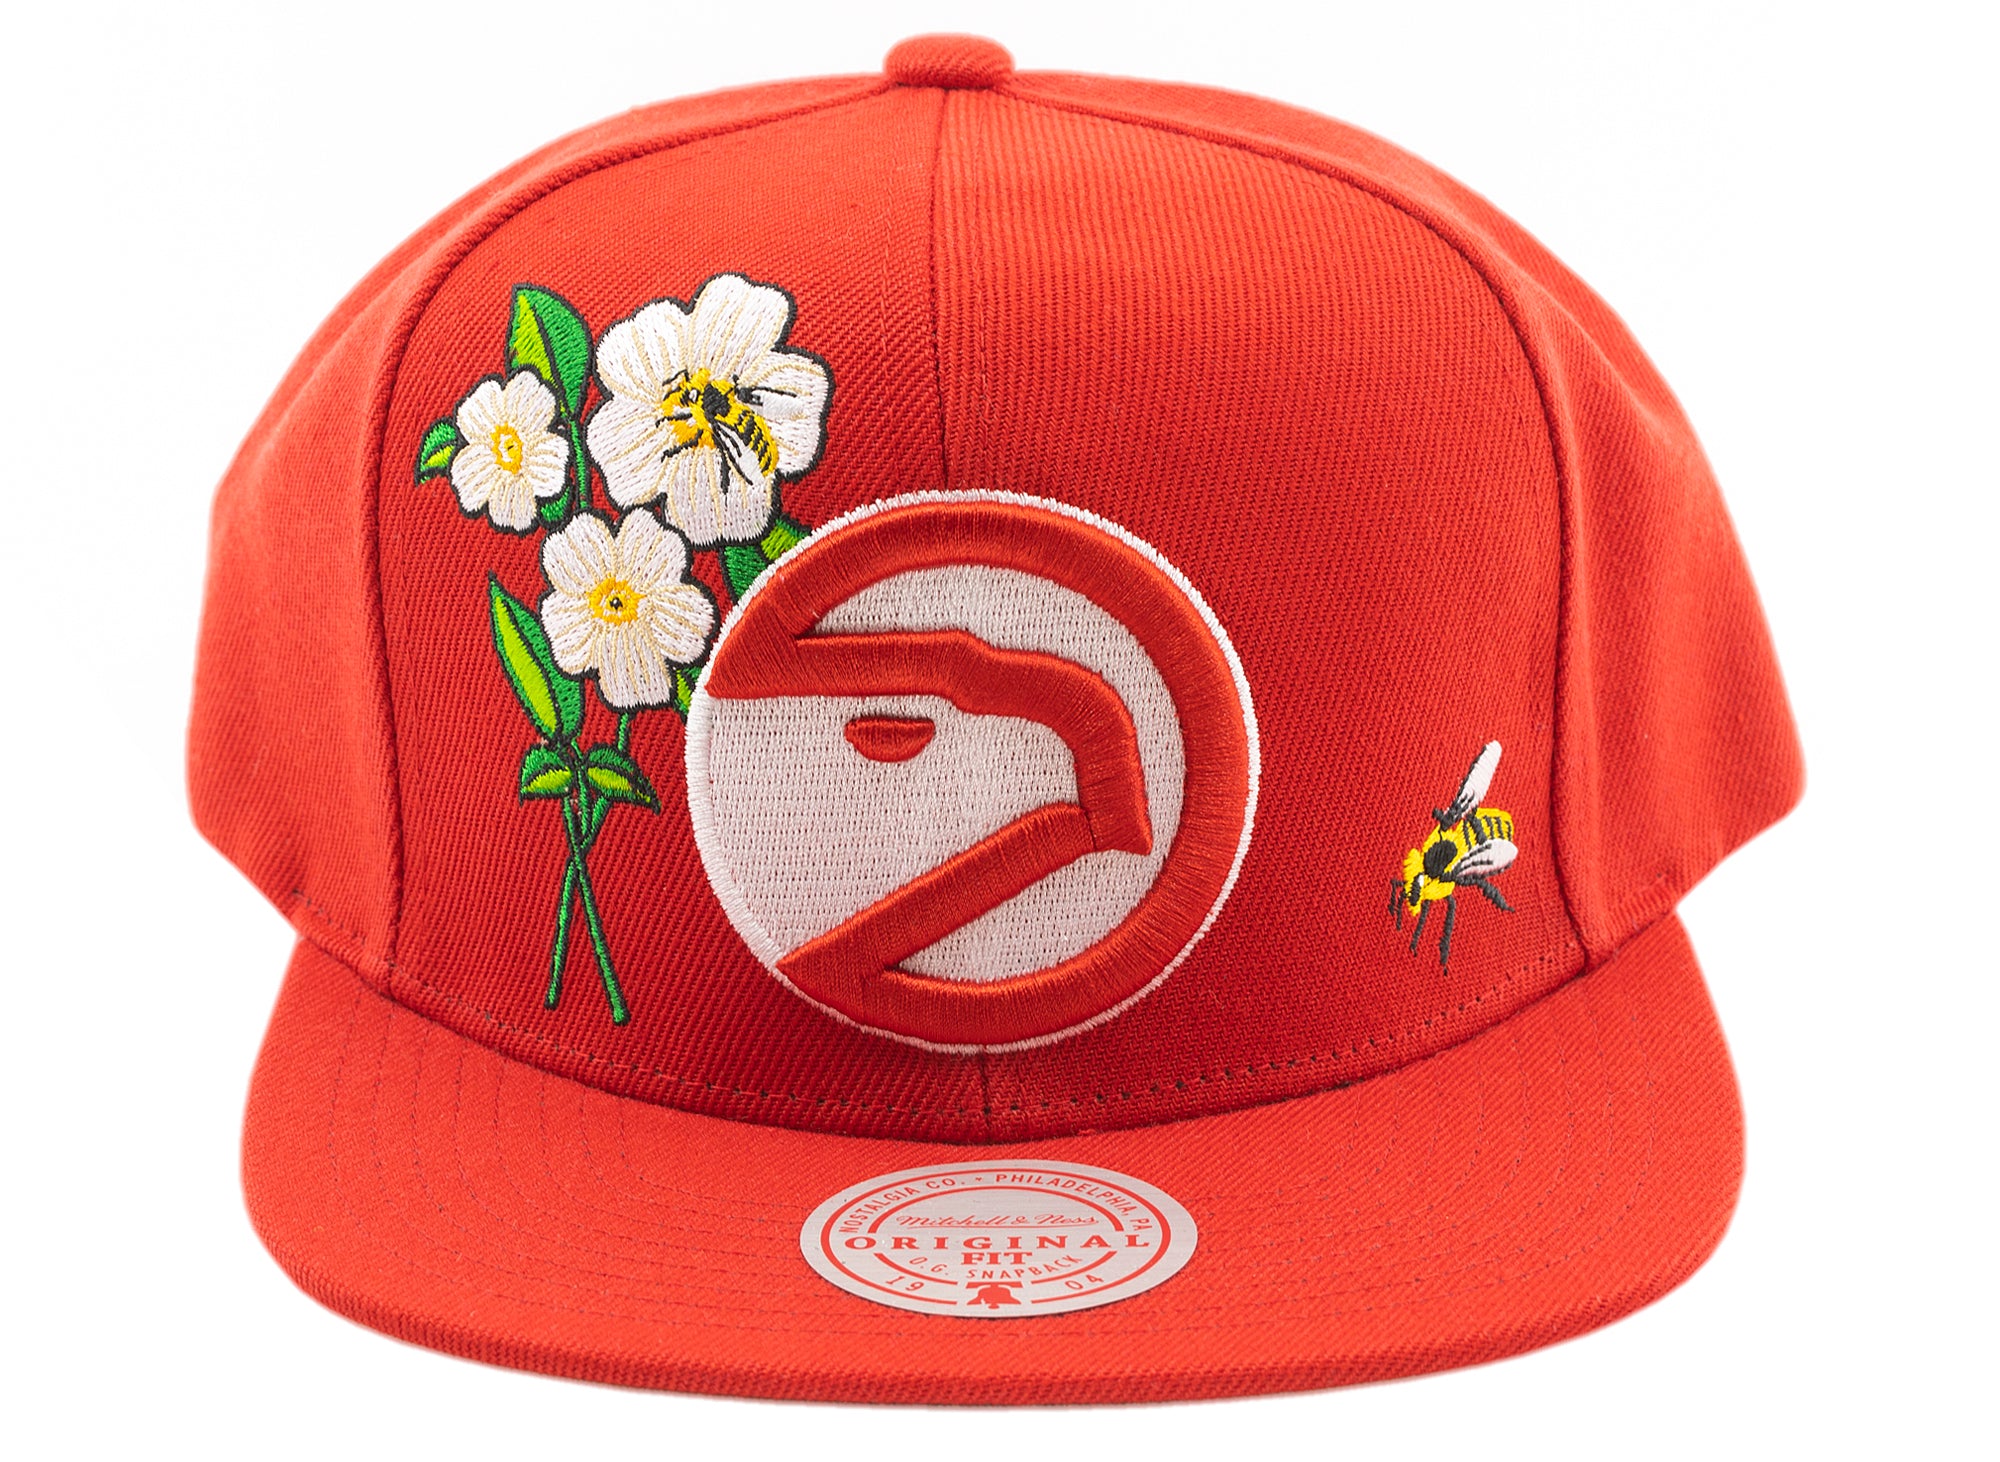 Mitchell & Ness - Atlanta Hawks' heritage with the soul of